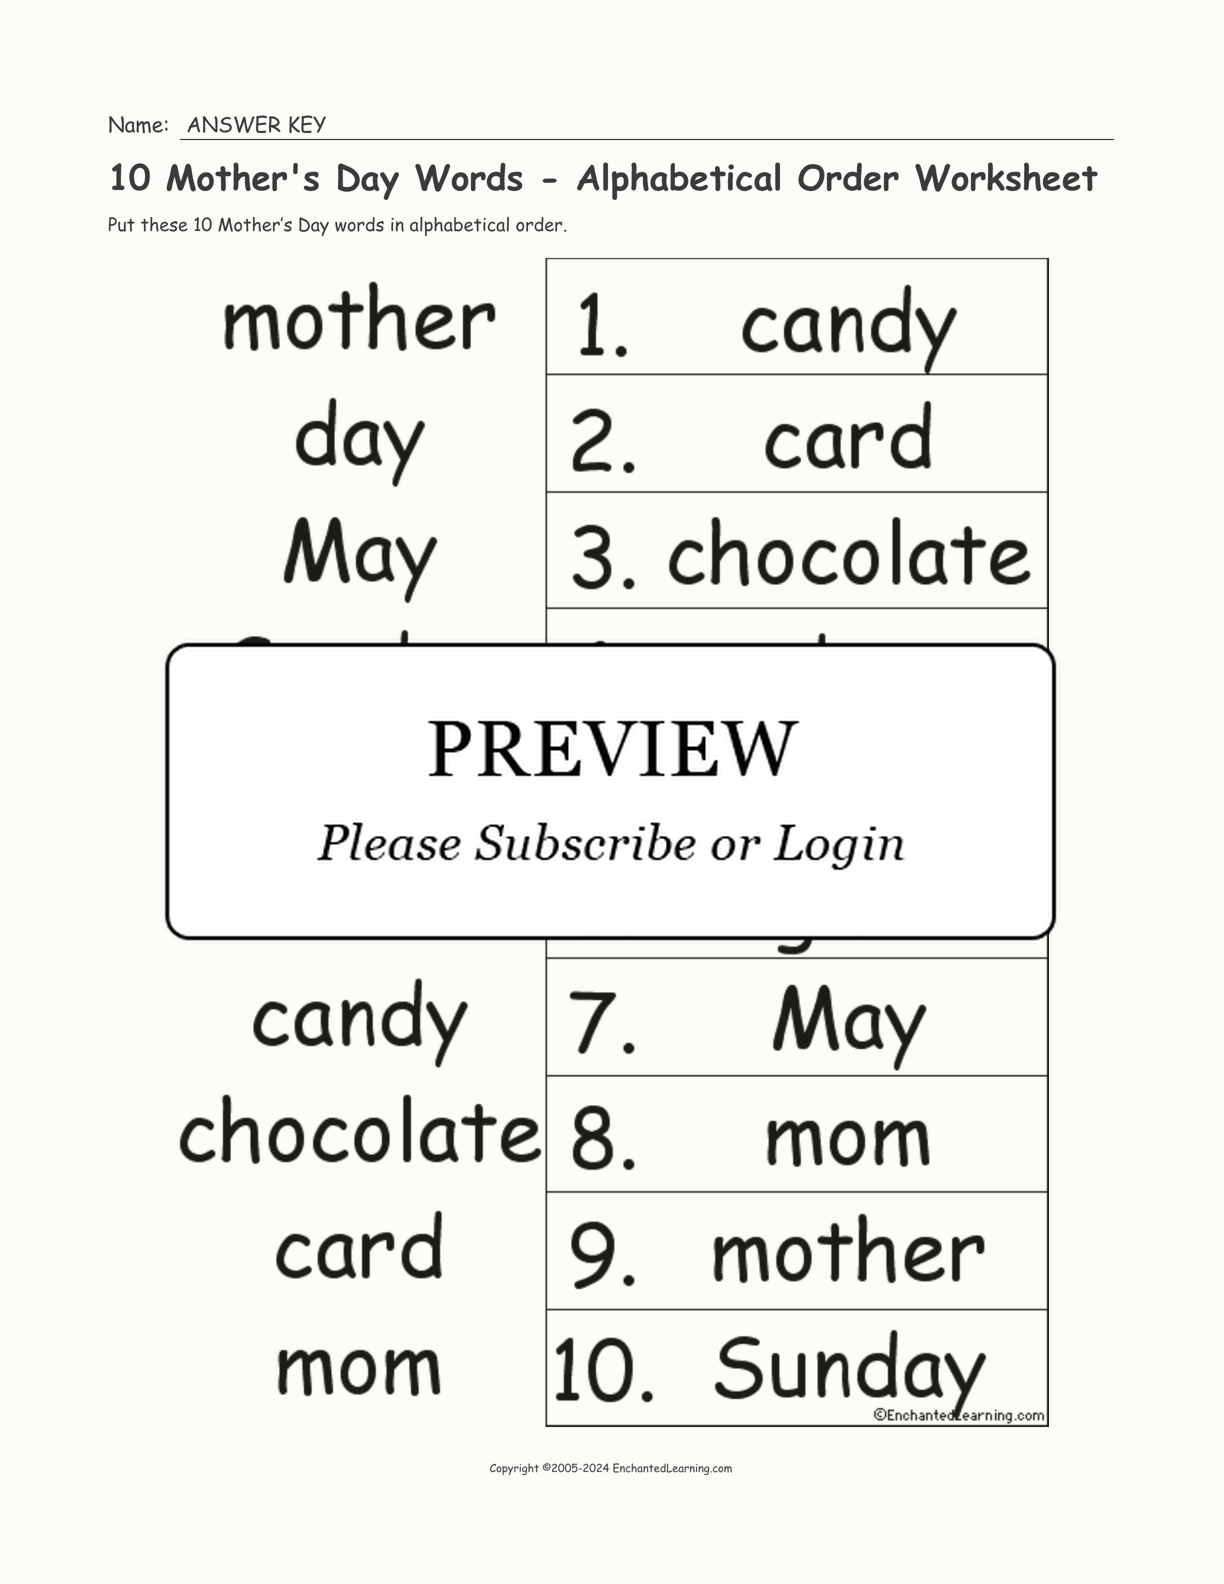 10 Mother's Day Words - Alphabetical Order Worksheet interactive worksheet page 2